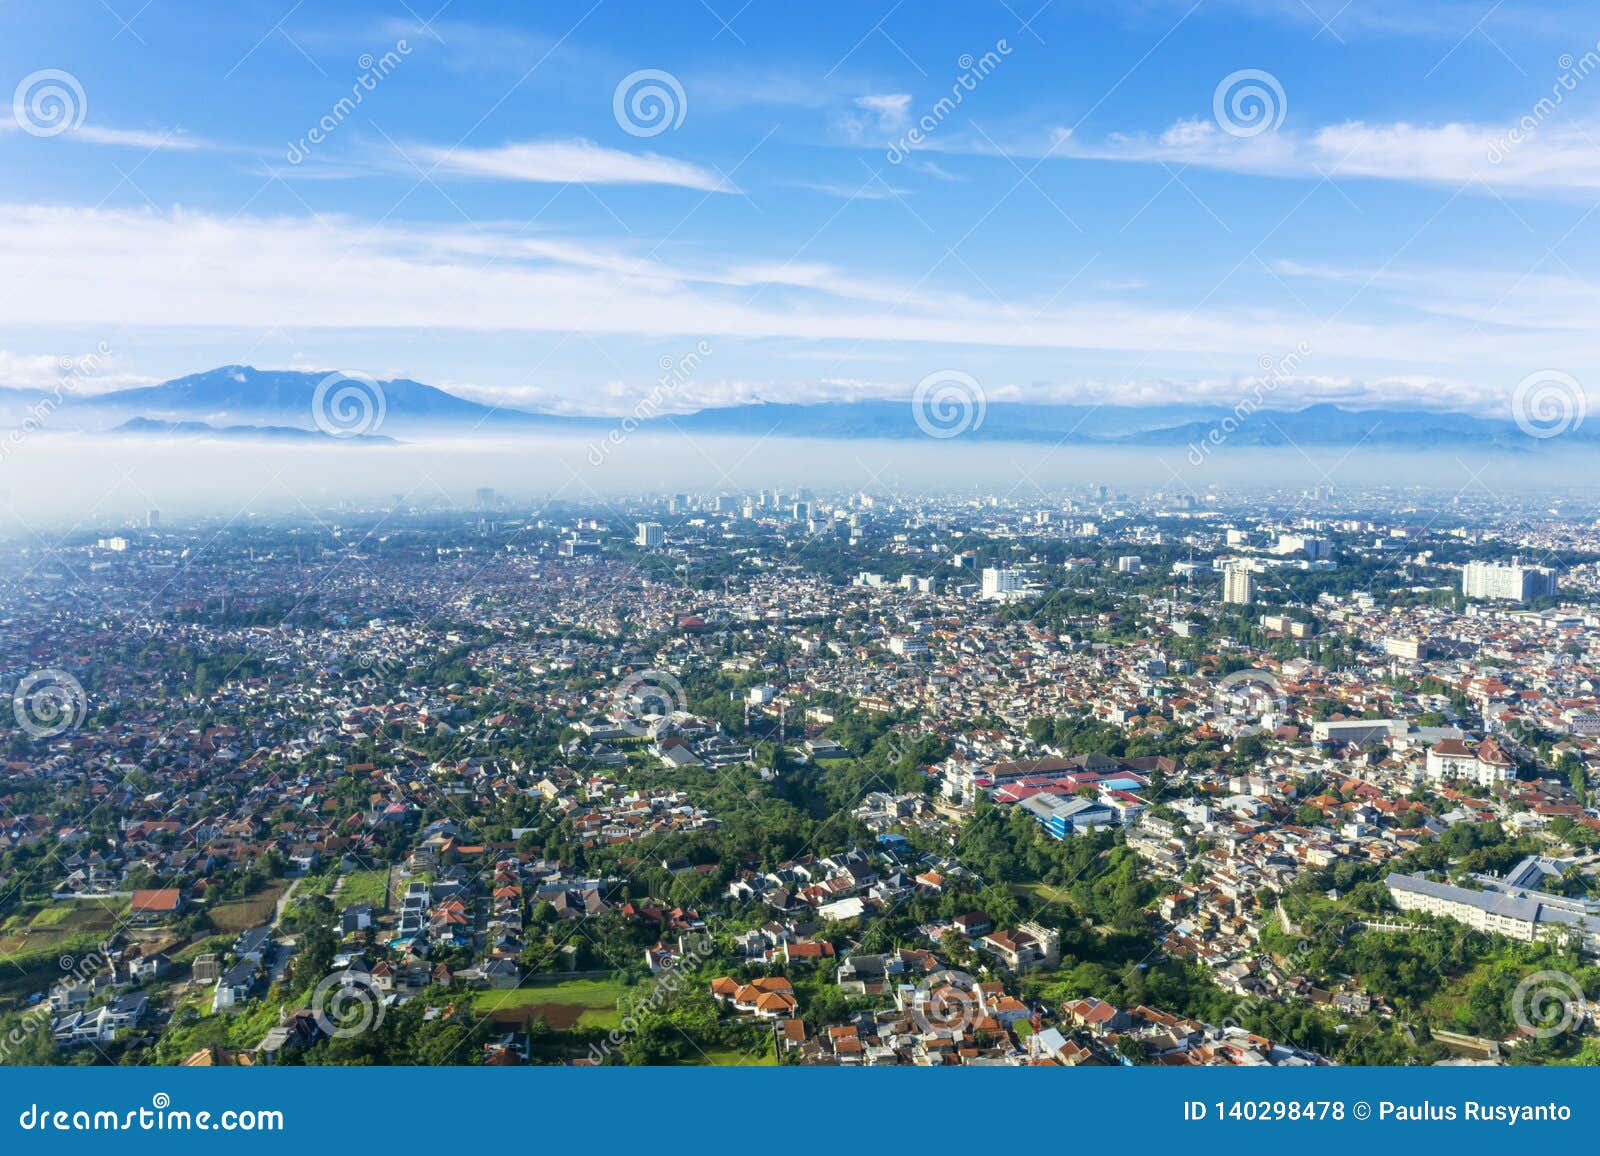 bandung city with crowd houses at misty morning